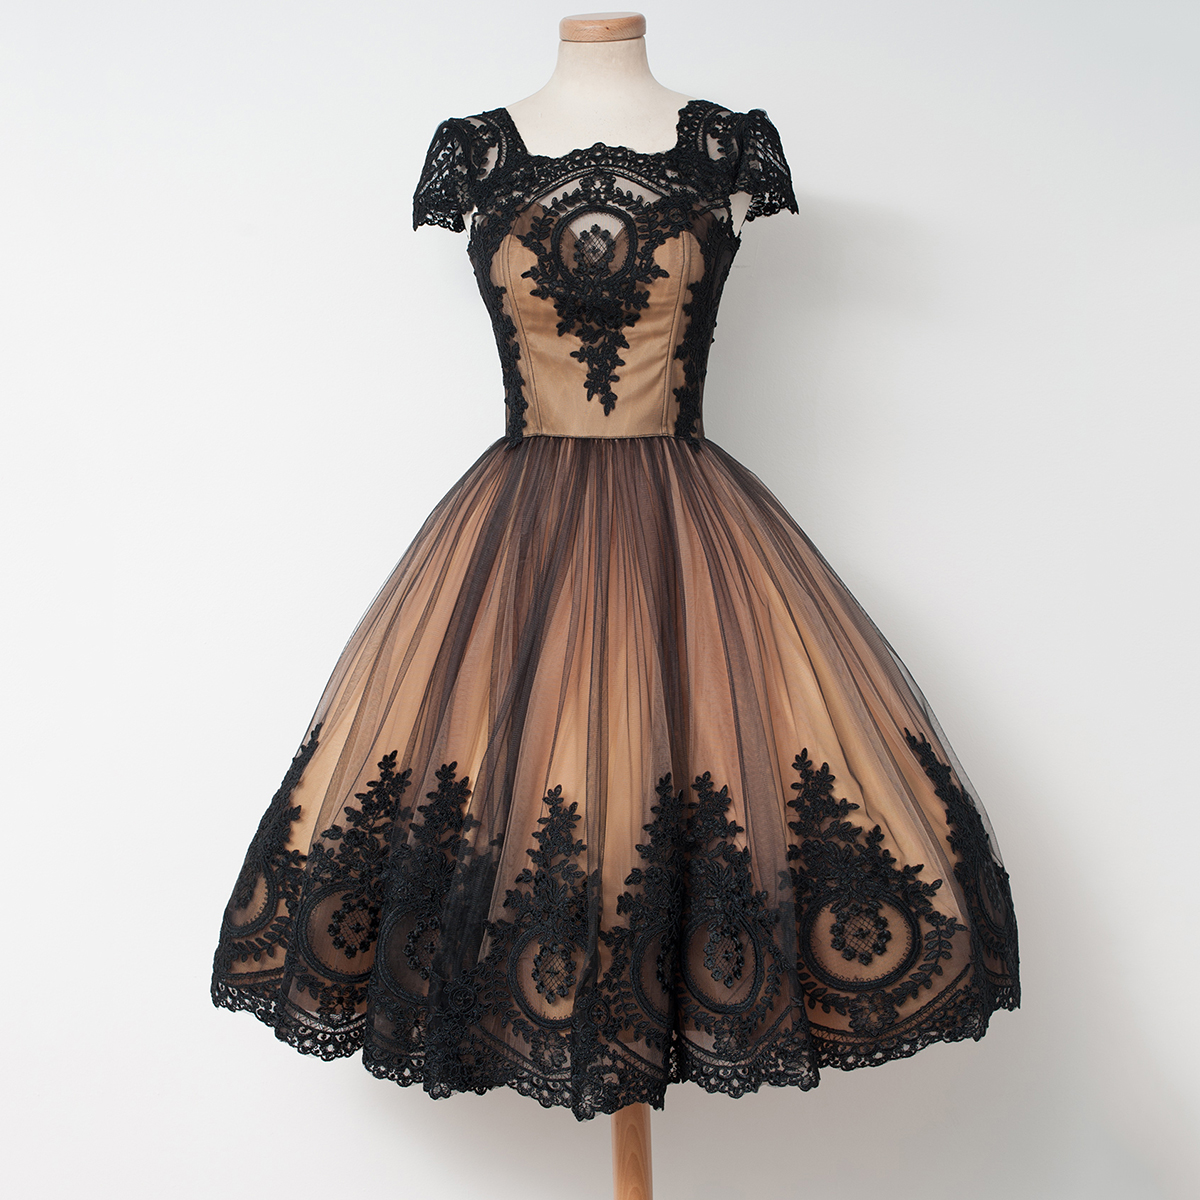 Princess Square Neckline Tulle Homecoming Dress Cap Sleeve Tea-length Prom Dresses With Black Lace Appliques Ss25